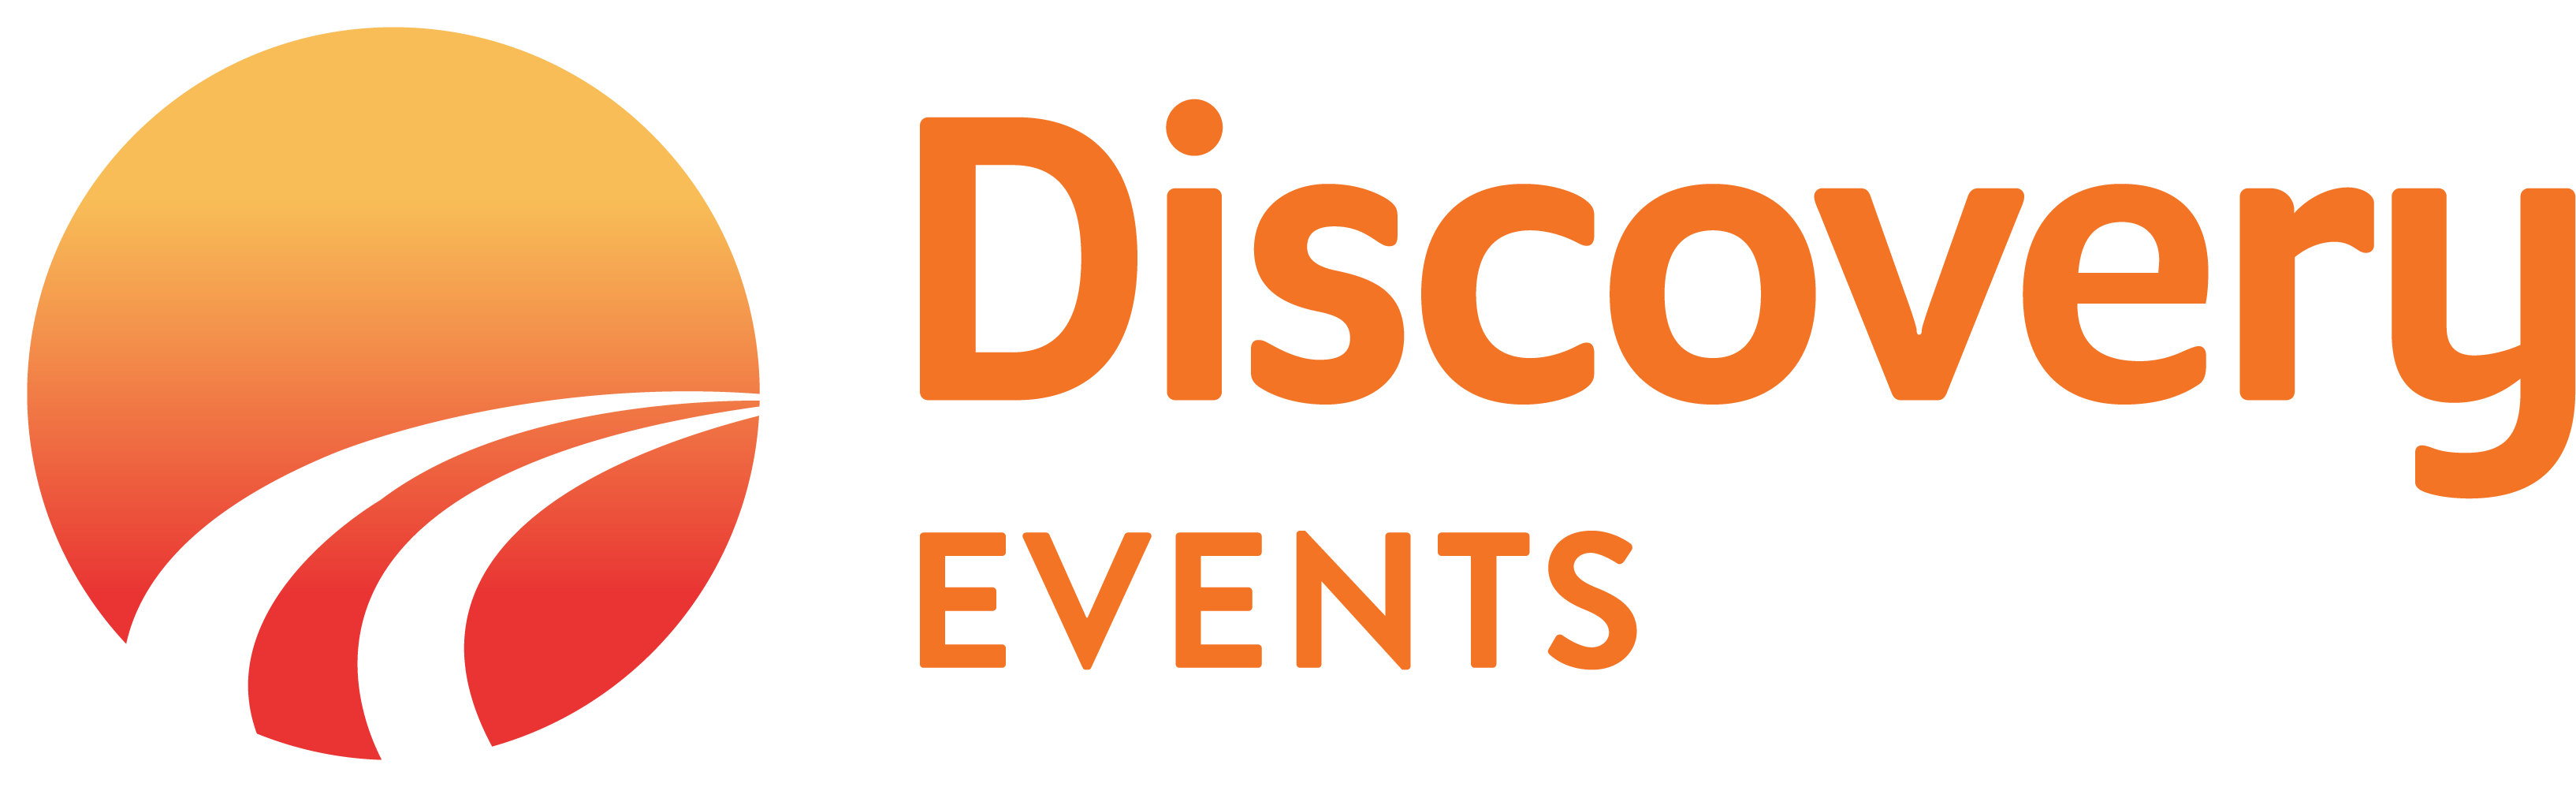 Discovery-Events-Logo